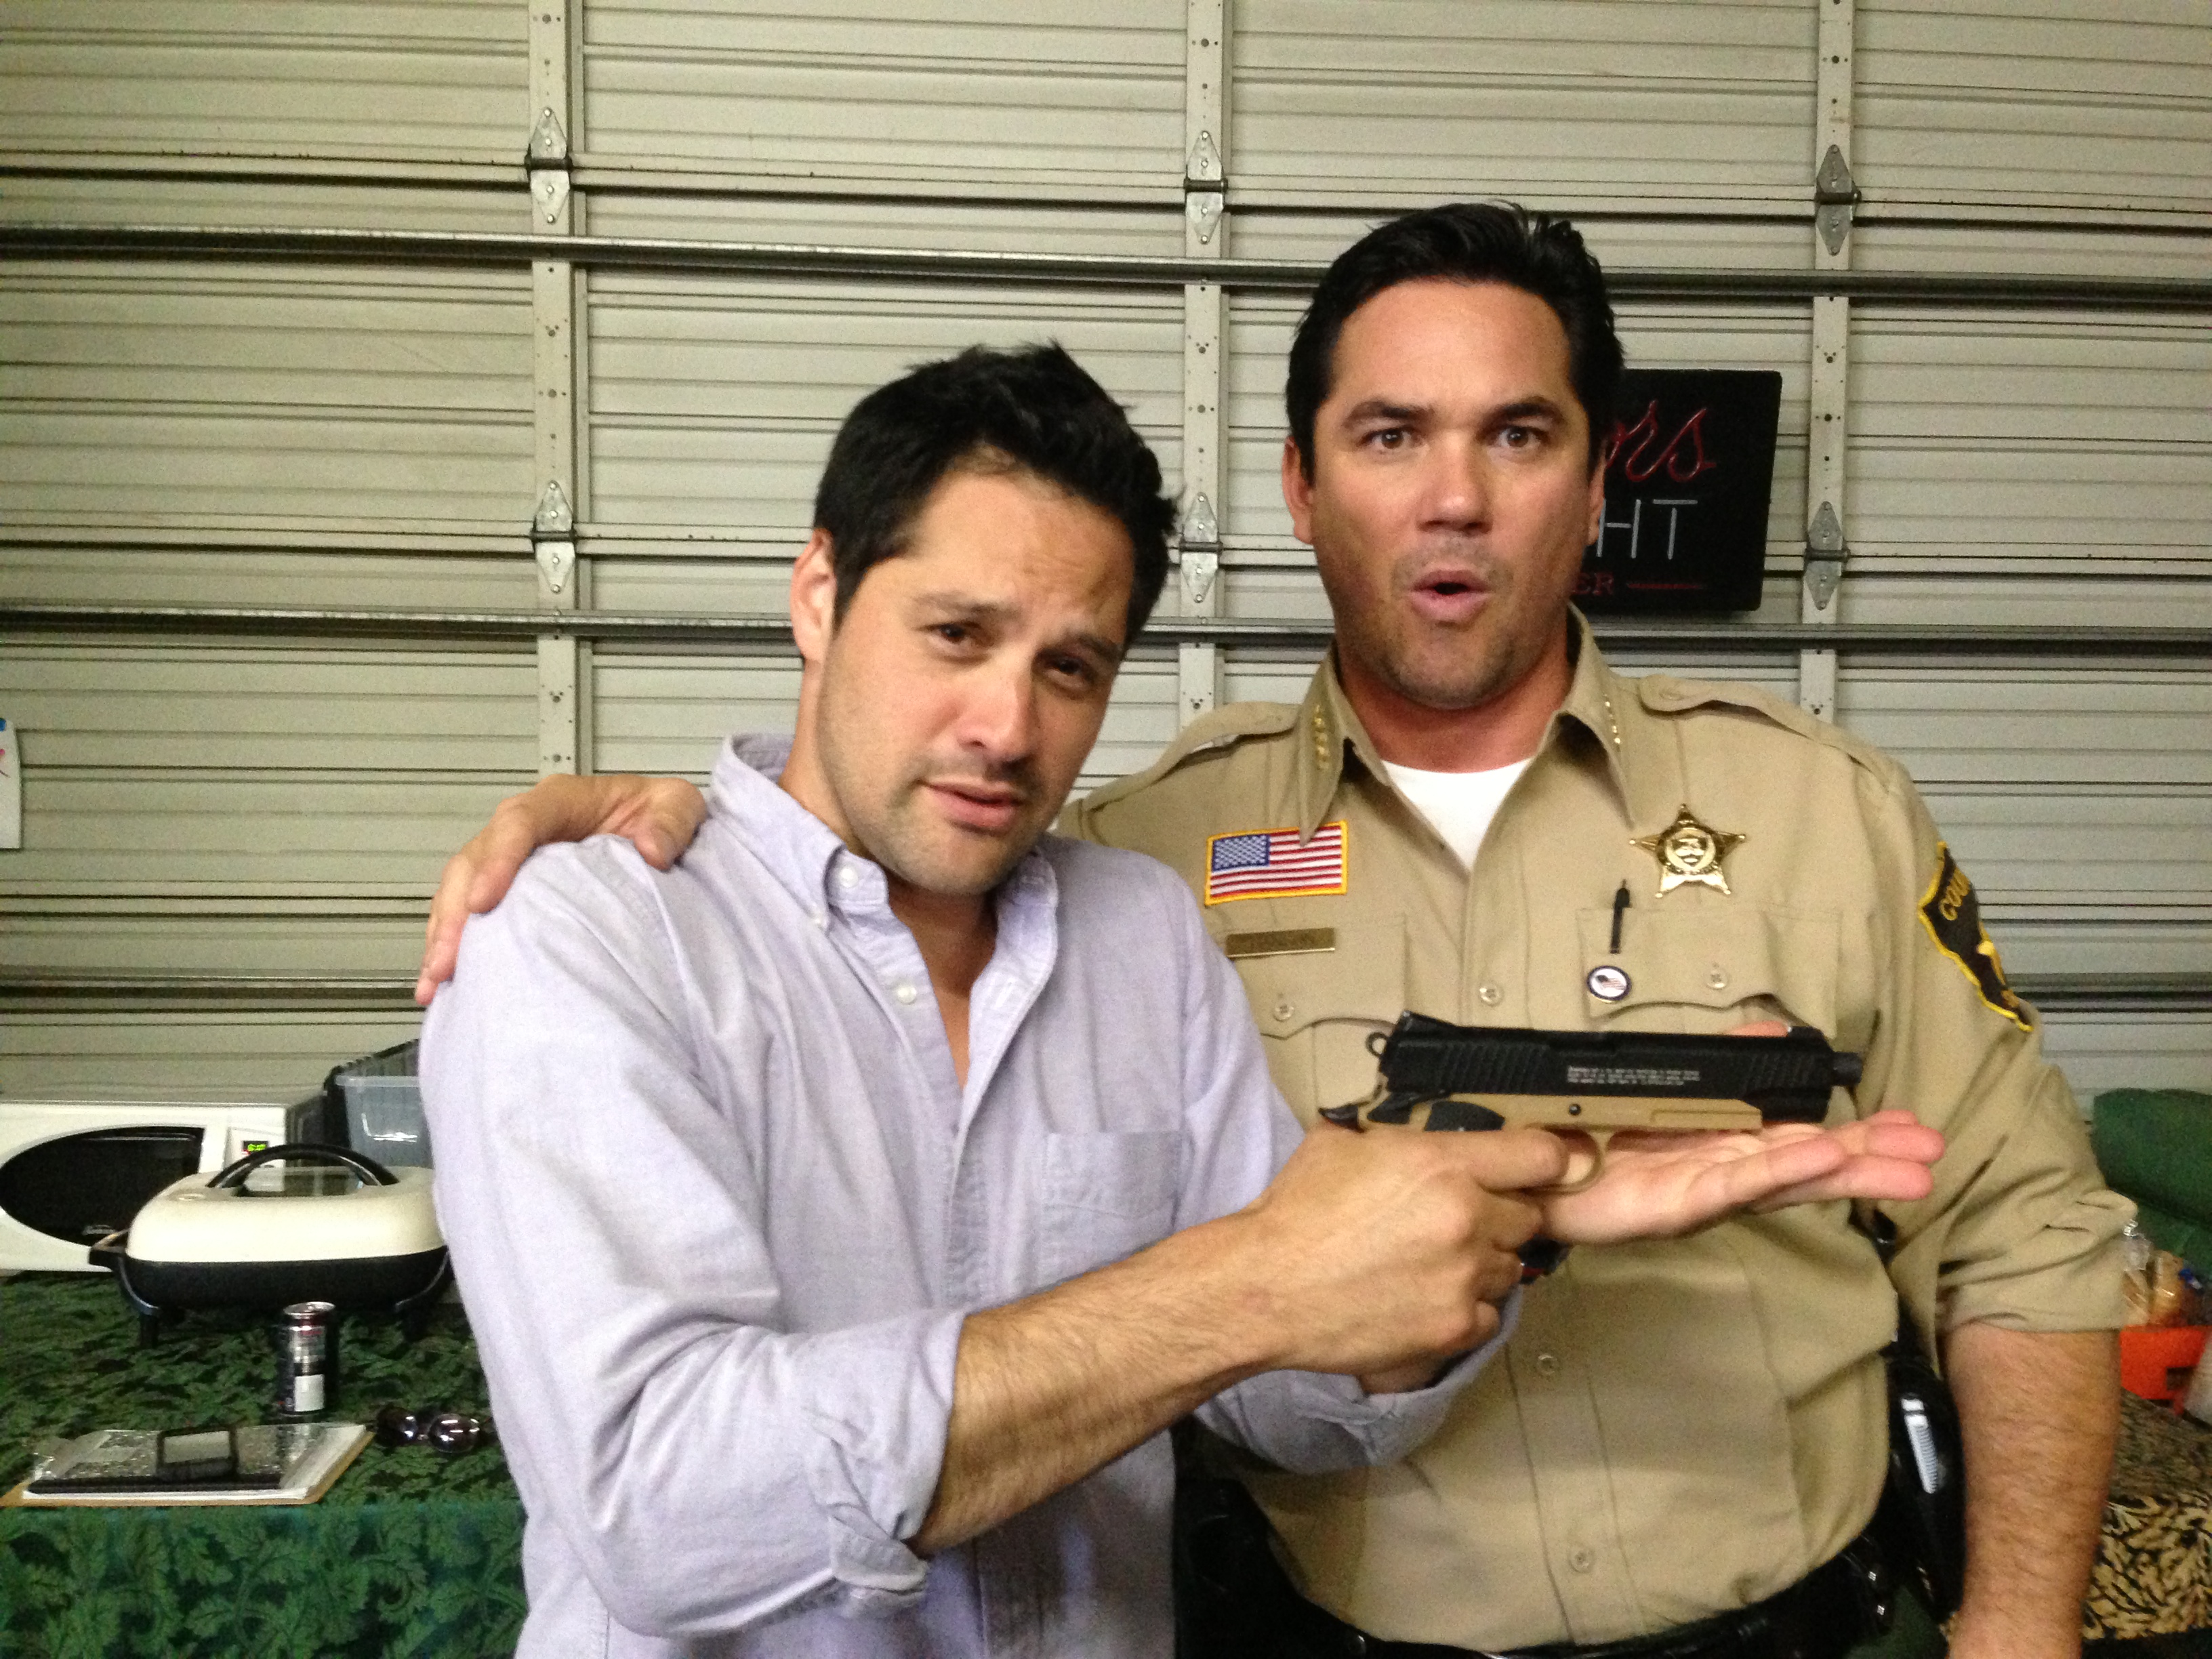 Seth Menachem and Dean Cain playing on the set of Defending Santa.